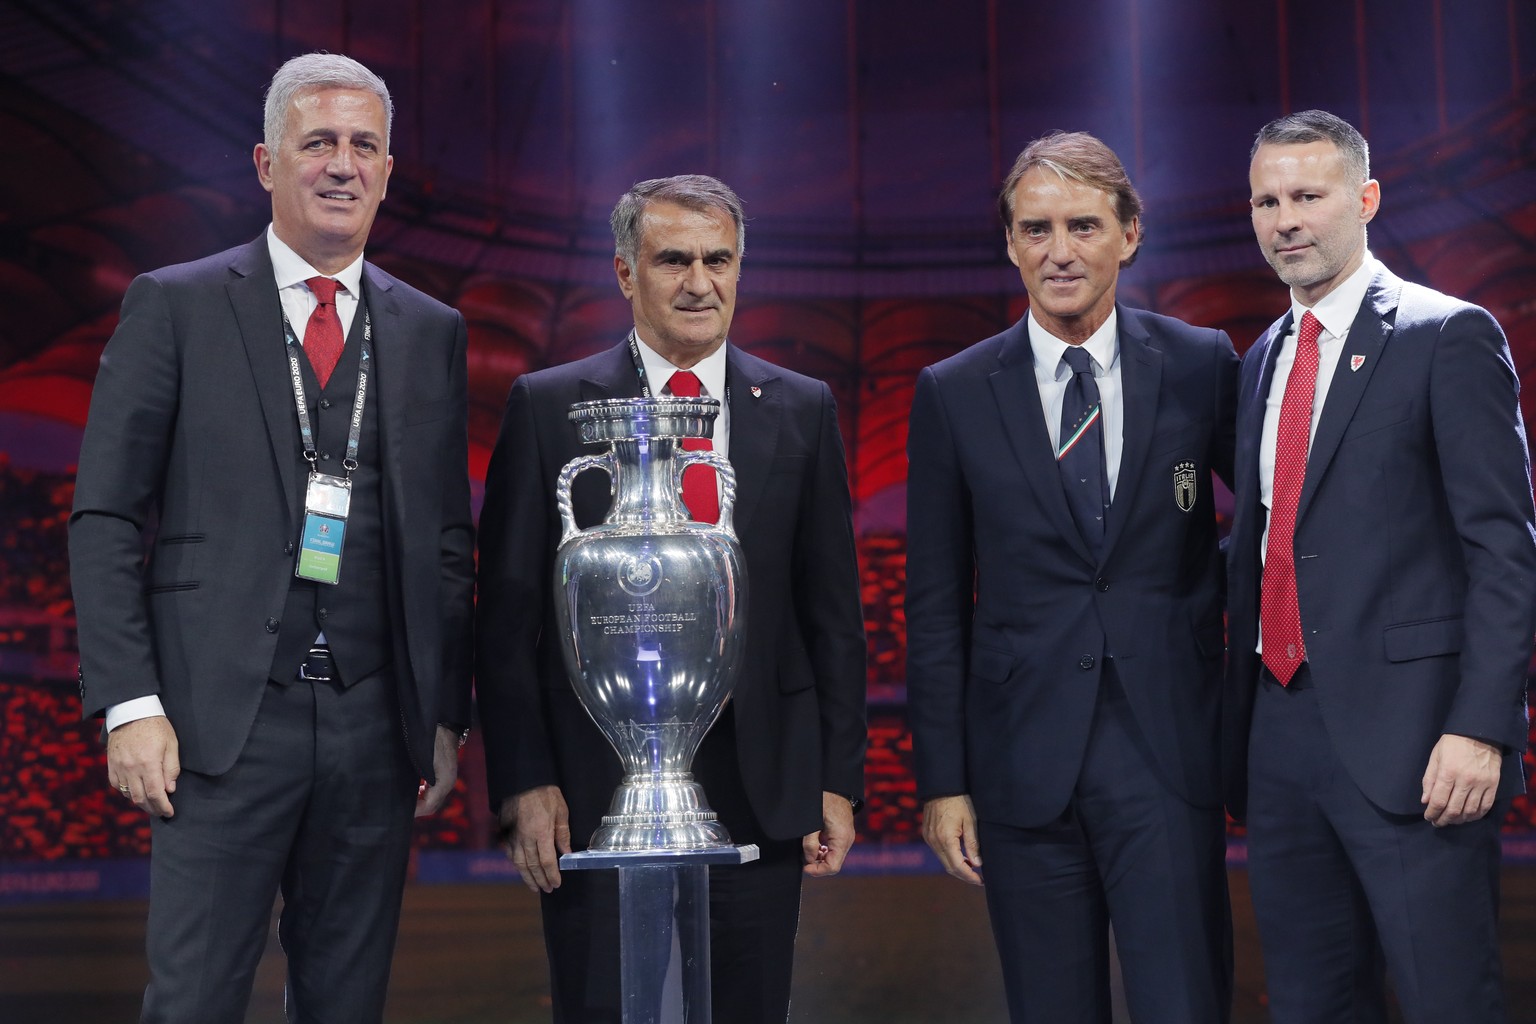 epa08035959 (L-R) Head coach of Switzerland Vladimir Petkovic, head coach of Turkey Senol Gunes, head coach of Italy Roberto Mancini and head coach of Wales Ryan Giggs during the UEFA EURO 2020 final  ...